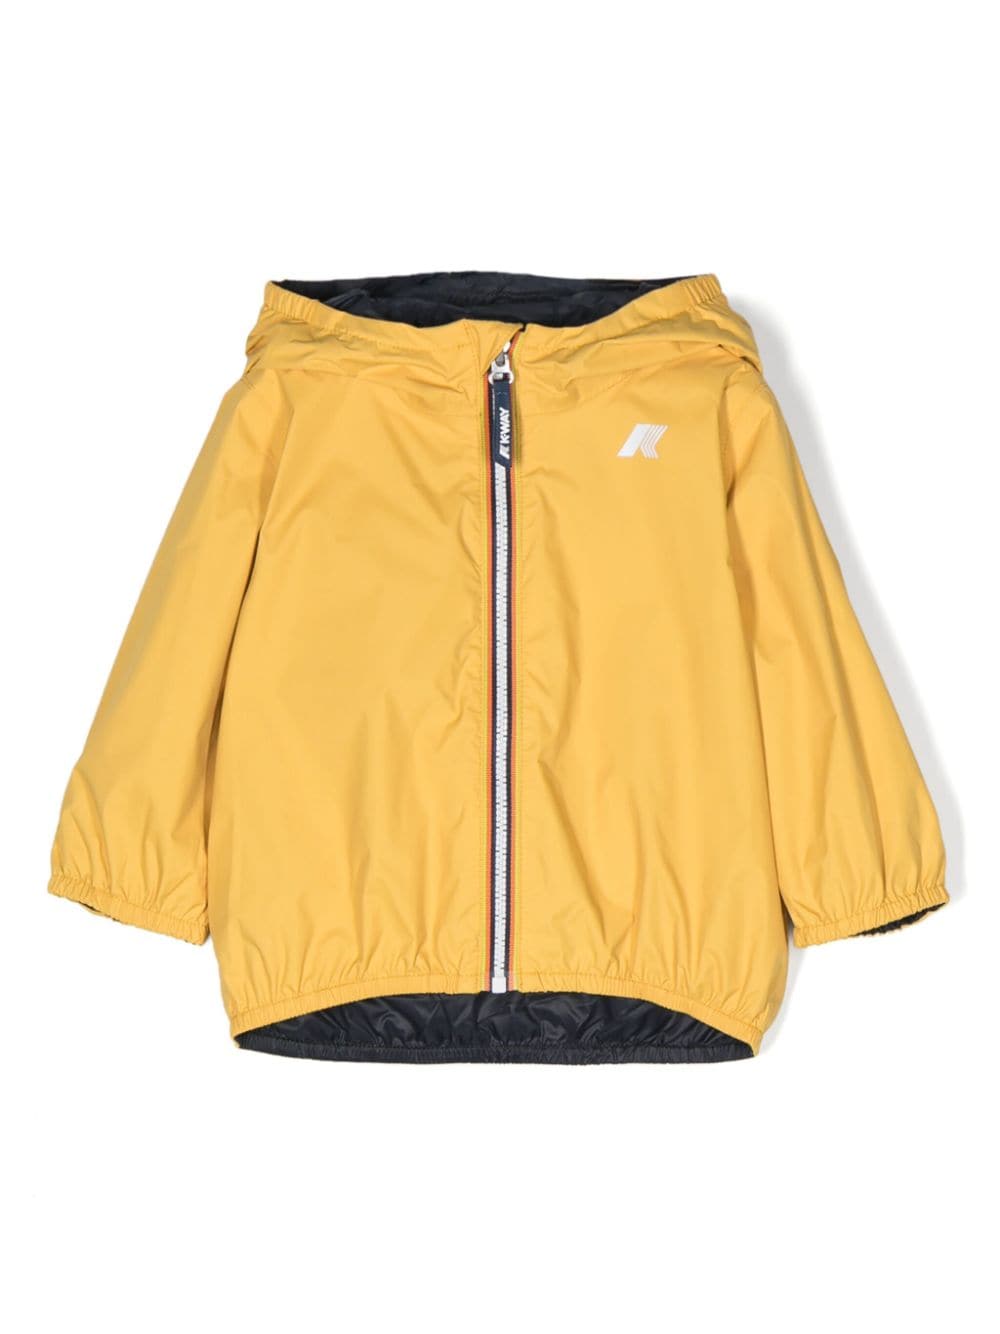 Yellow and blue jacket for newborns